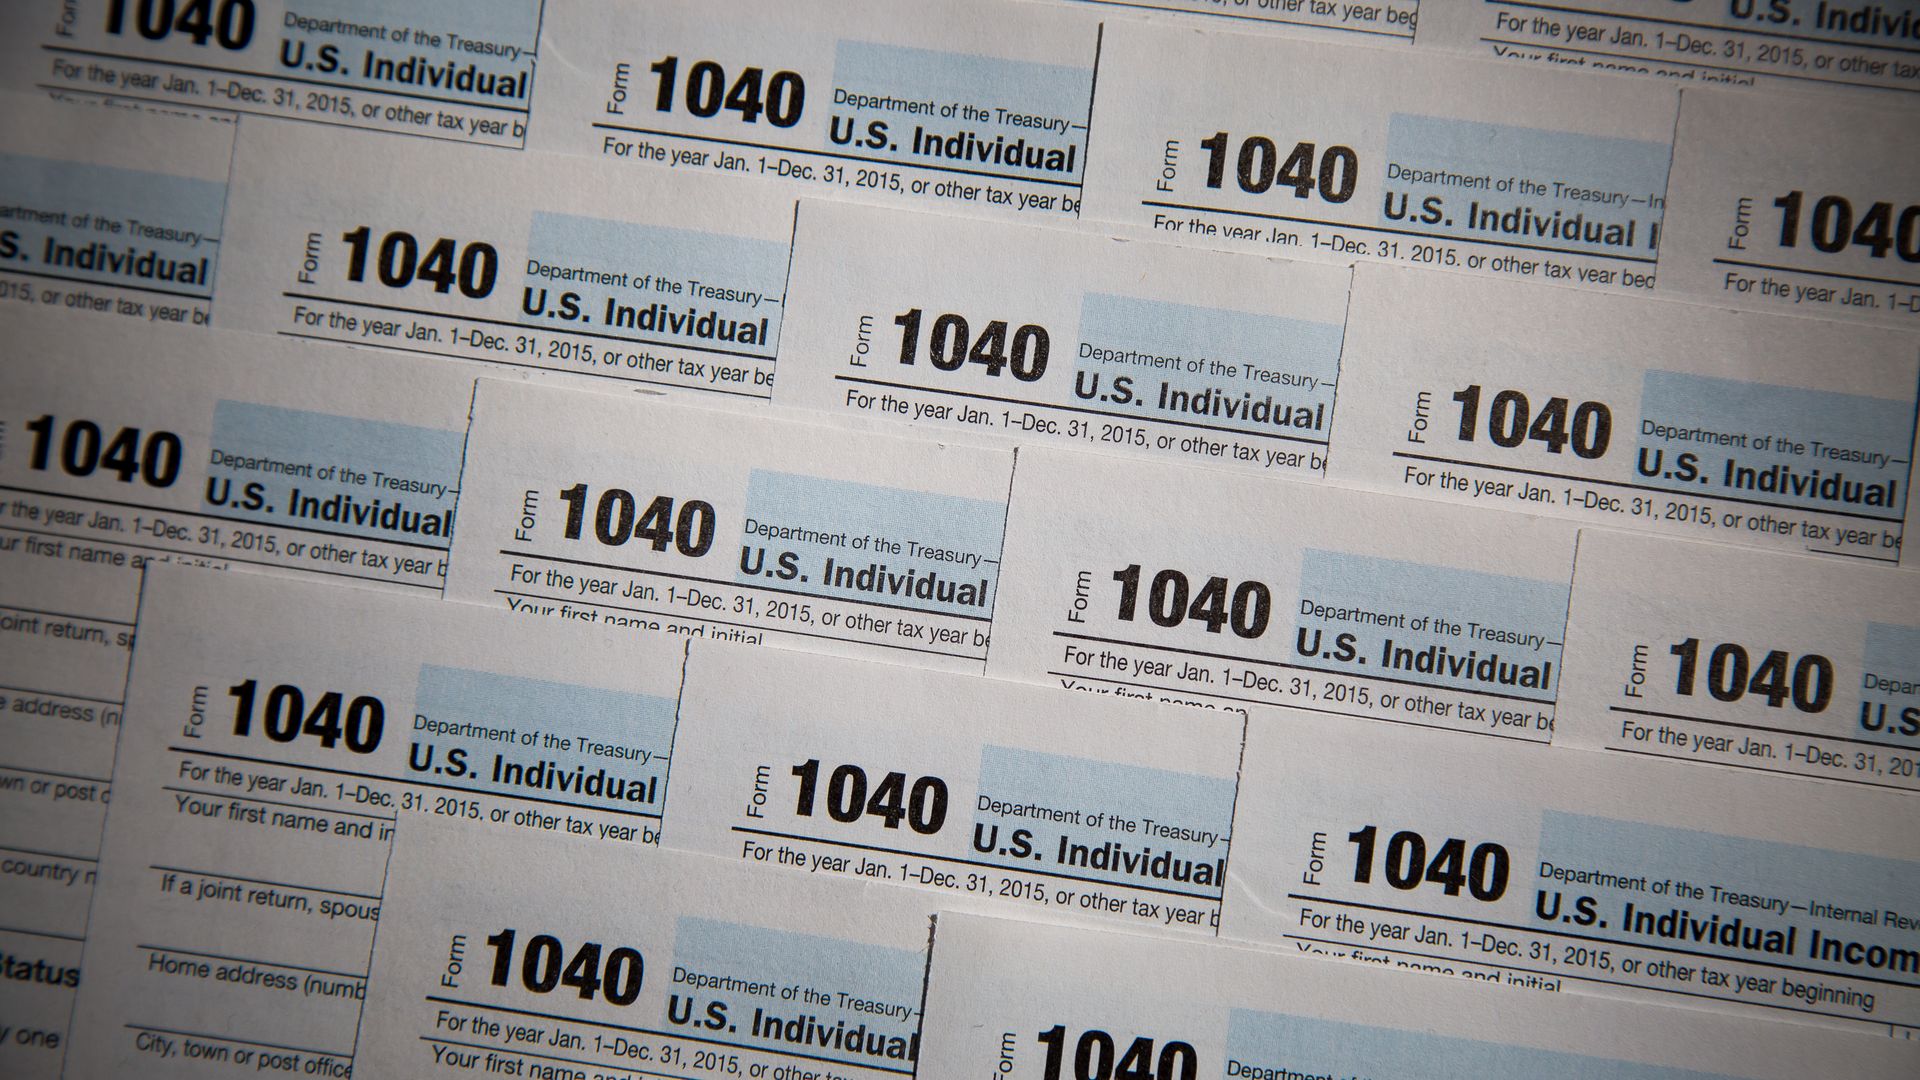 1040 Individual Income Tax forms for the 2015 tax year 